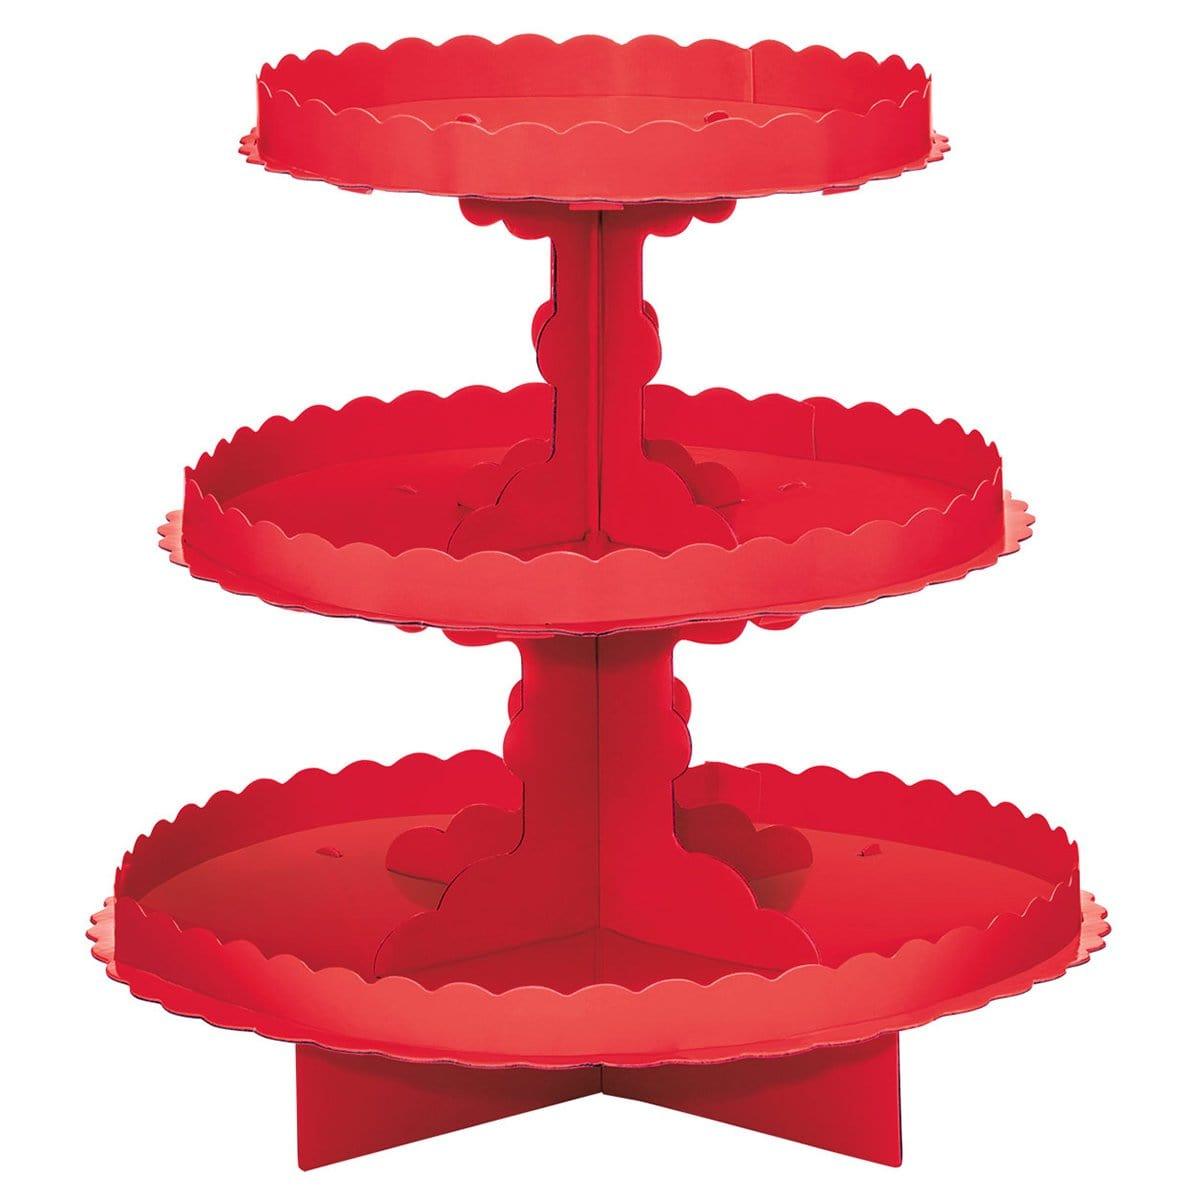 Buy Cake Supplies Treat Stand - Red sold at Party Expert